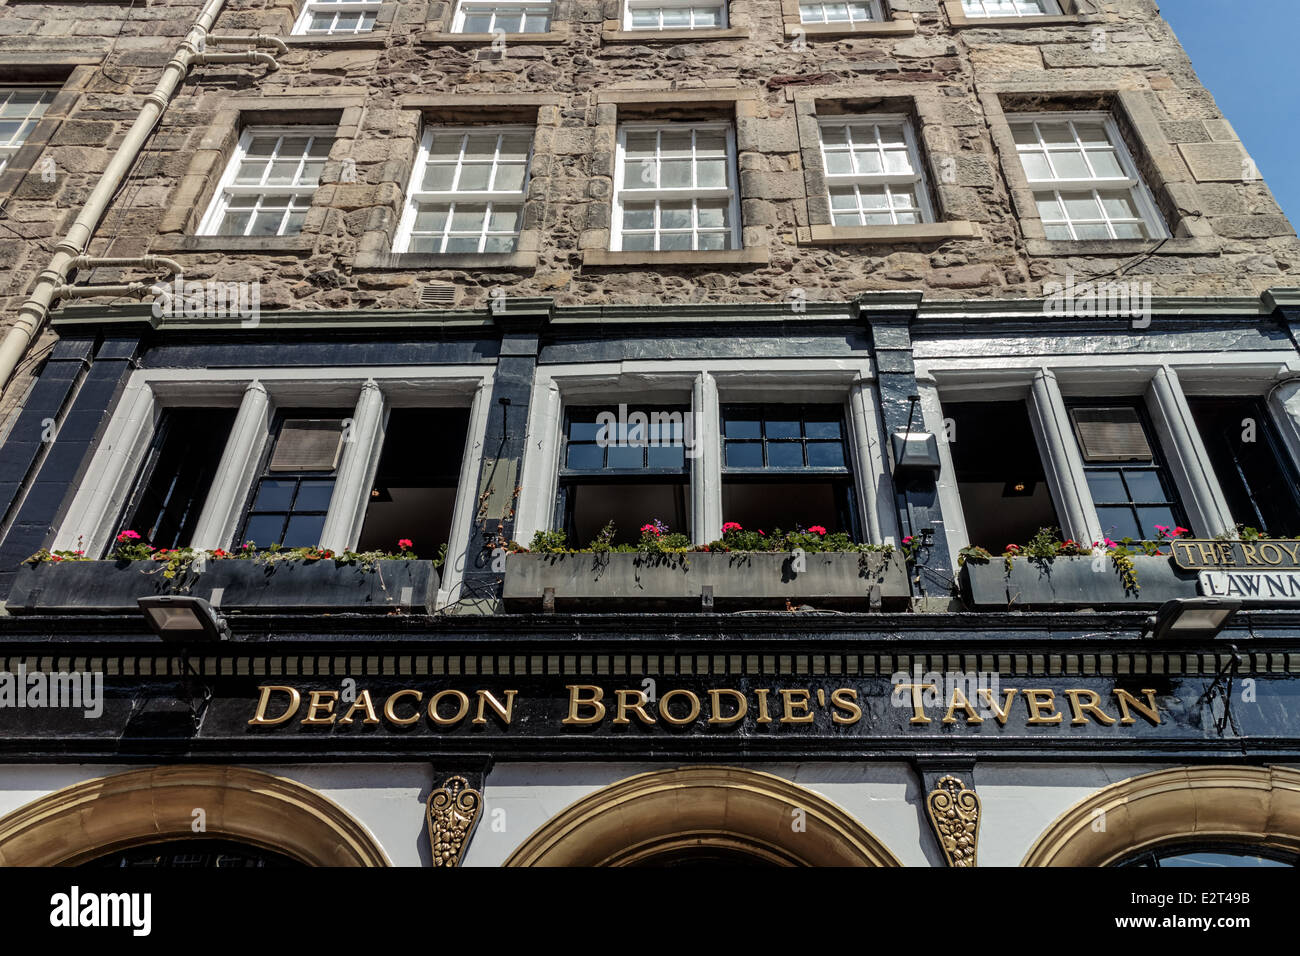 The front of Deacon Brodie's Tavern on the Royal Mile Edinburgh Stock Photo